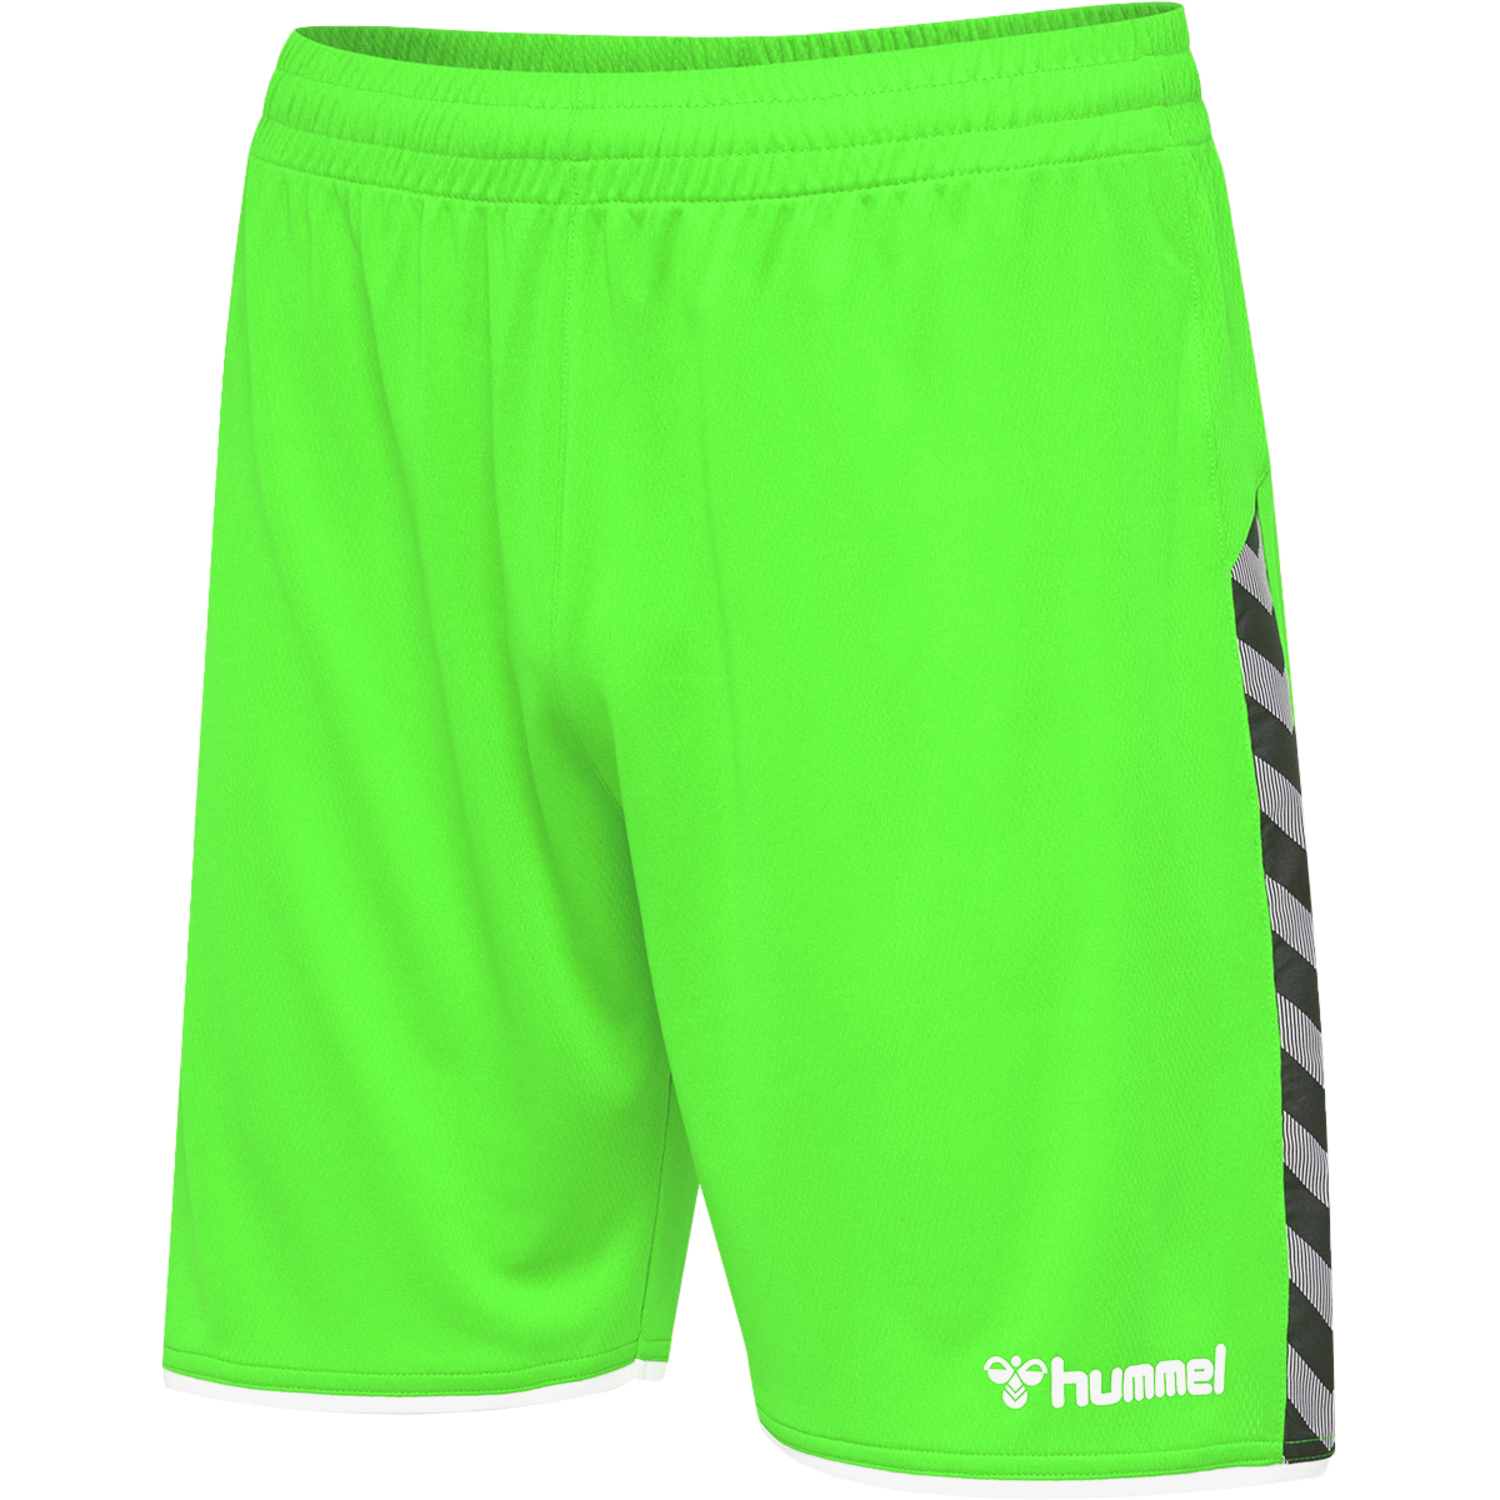 SHORTS POLY GECKO hummel AUTHENTIC KIDS - GREEN